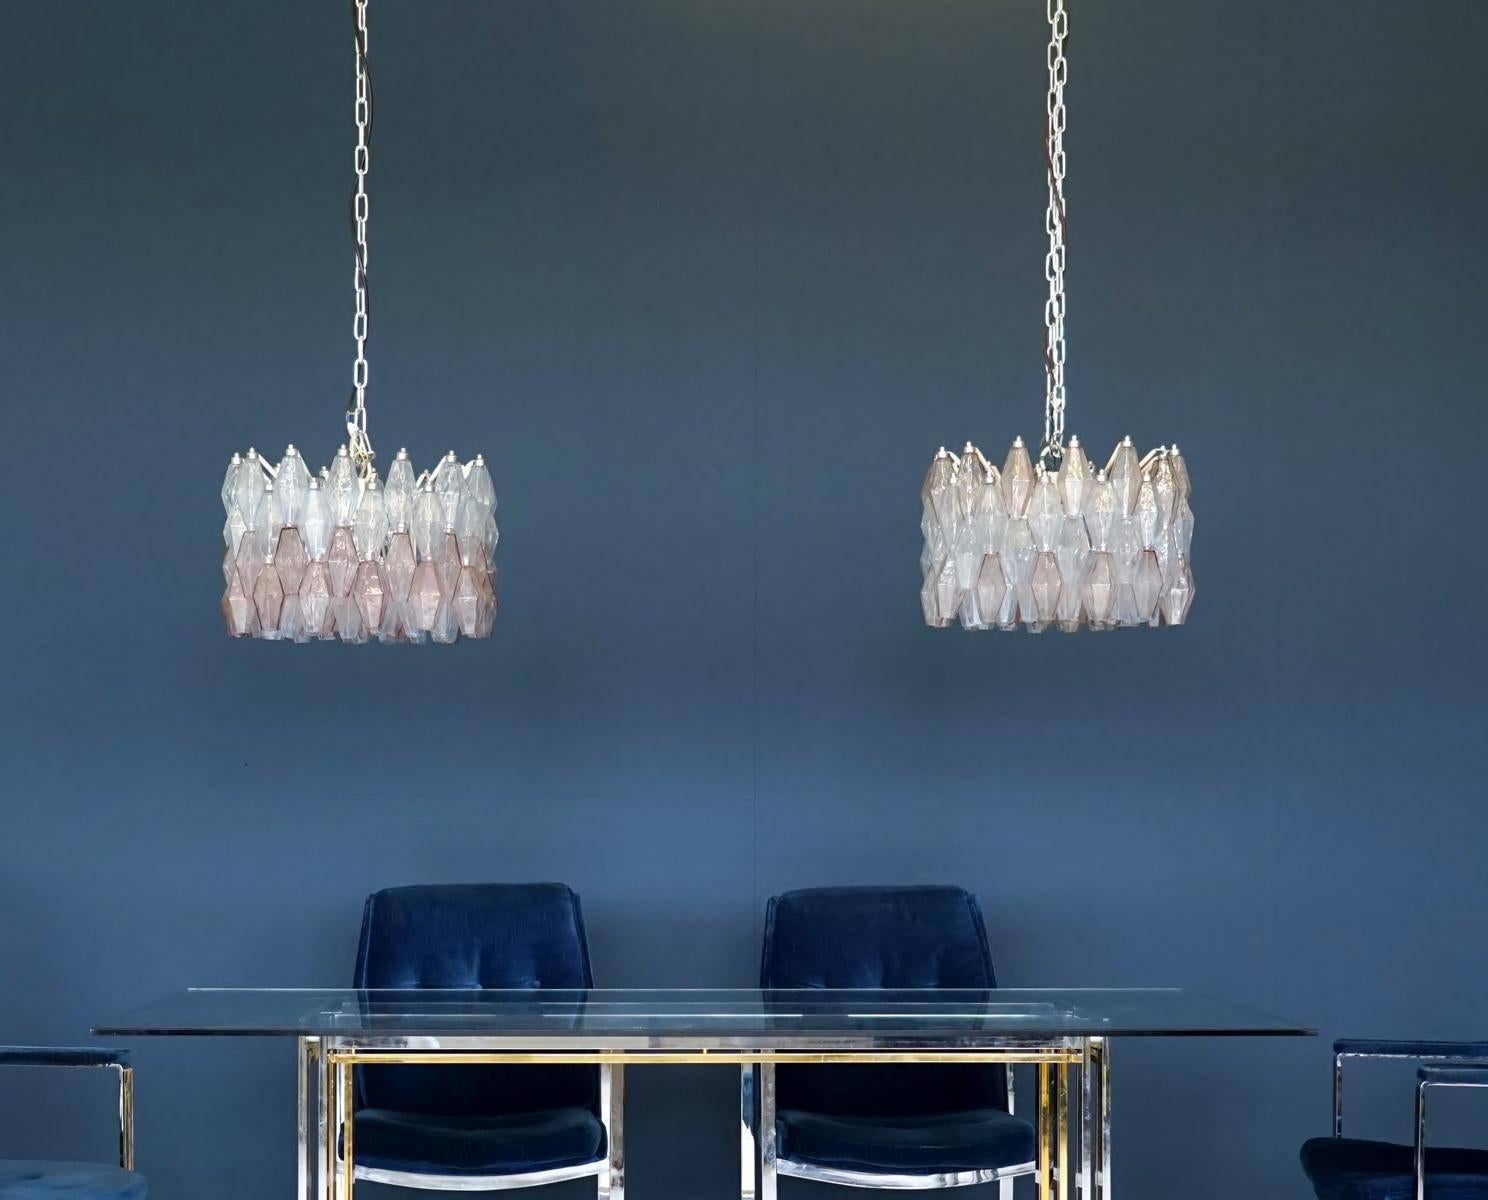 Pair of Polyhedr Venini glass chandelier lamp light poliedri by Carlo Scarpa

Beautiful and rare pair of chandeliers with blown glass.
Abstract diamond forms with faceted sides hanging from multi-armed interior frame.

All glasses available.